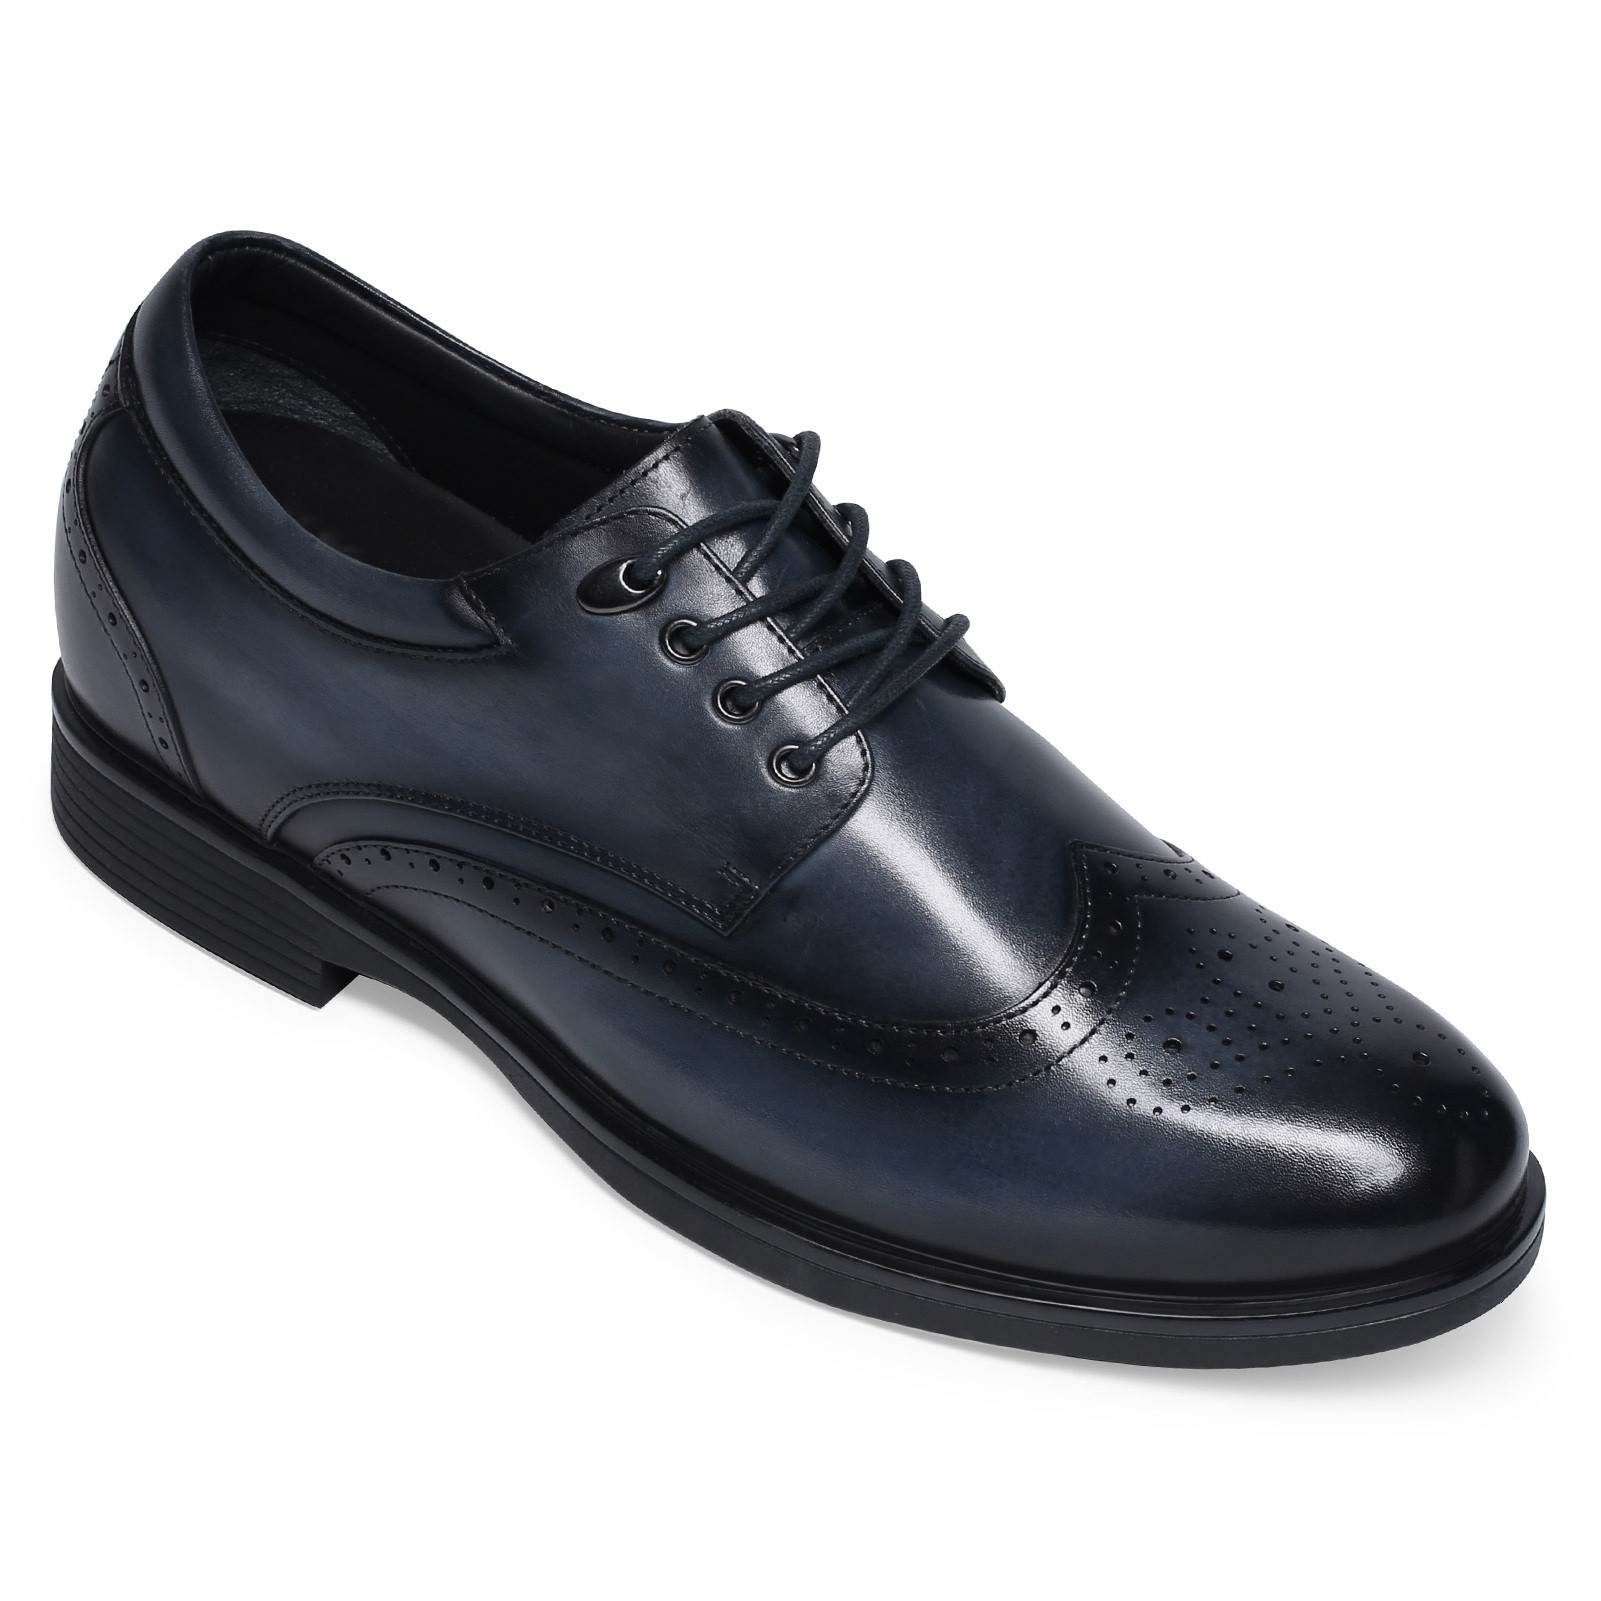 Dress Elevator Shoes- Mens Hand Painted Wingtip Oxford Shoes- Blue- 8 CM/3.15 Inches Taller